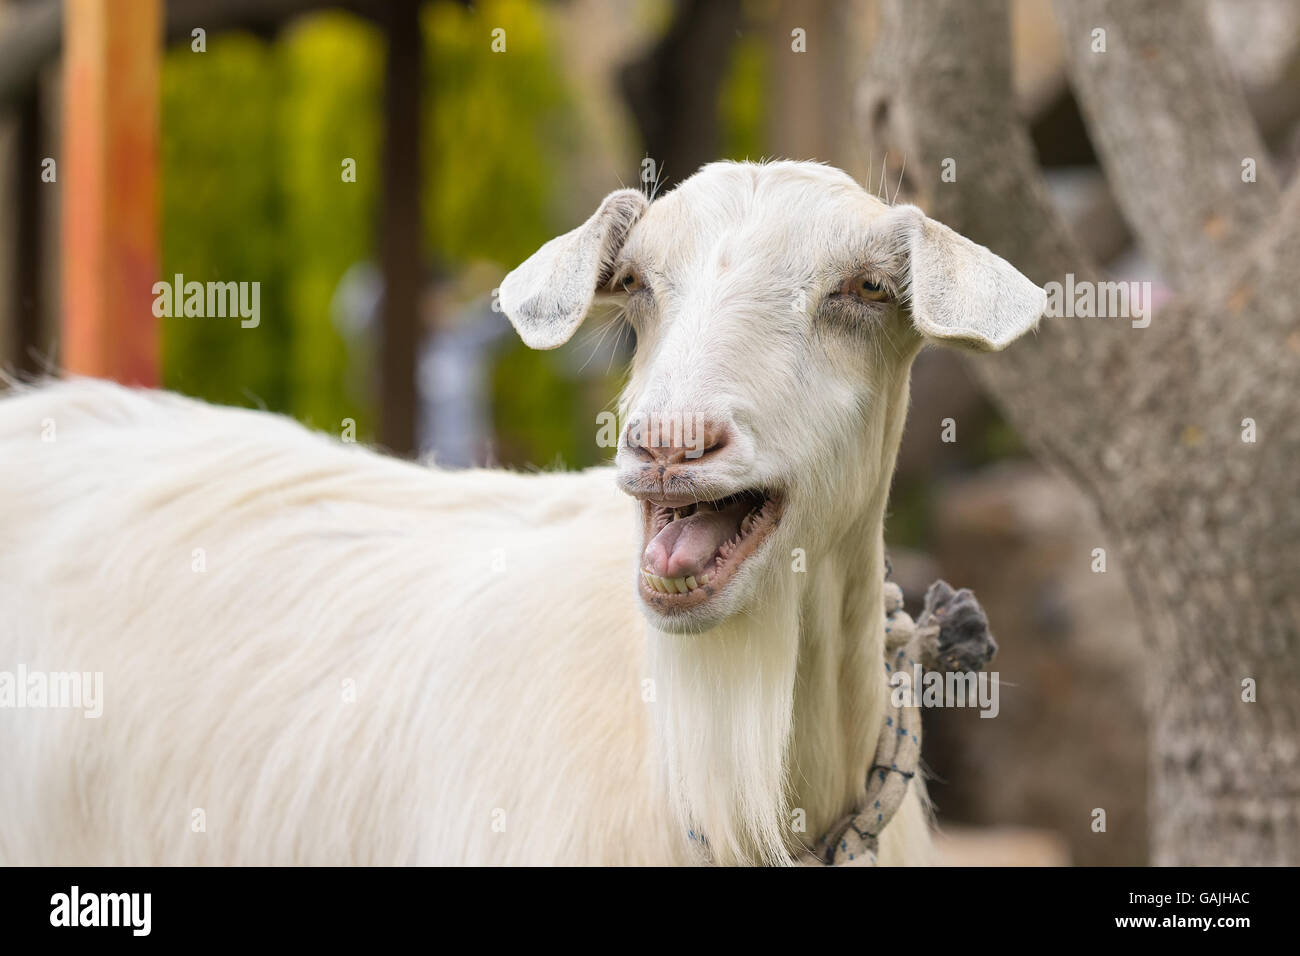 Funny goat portrait. A close up look. Stock Photo